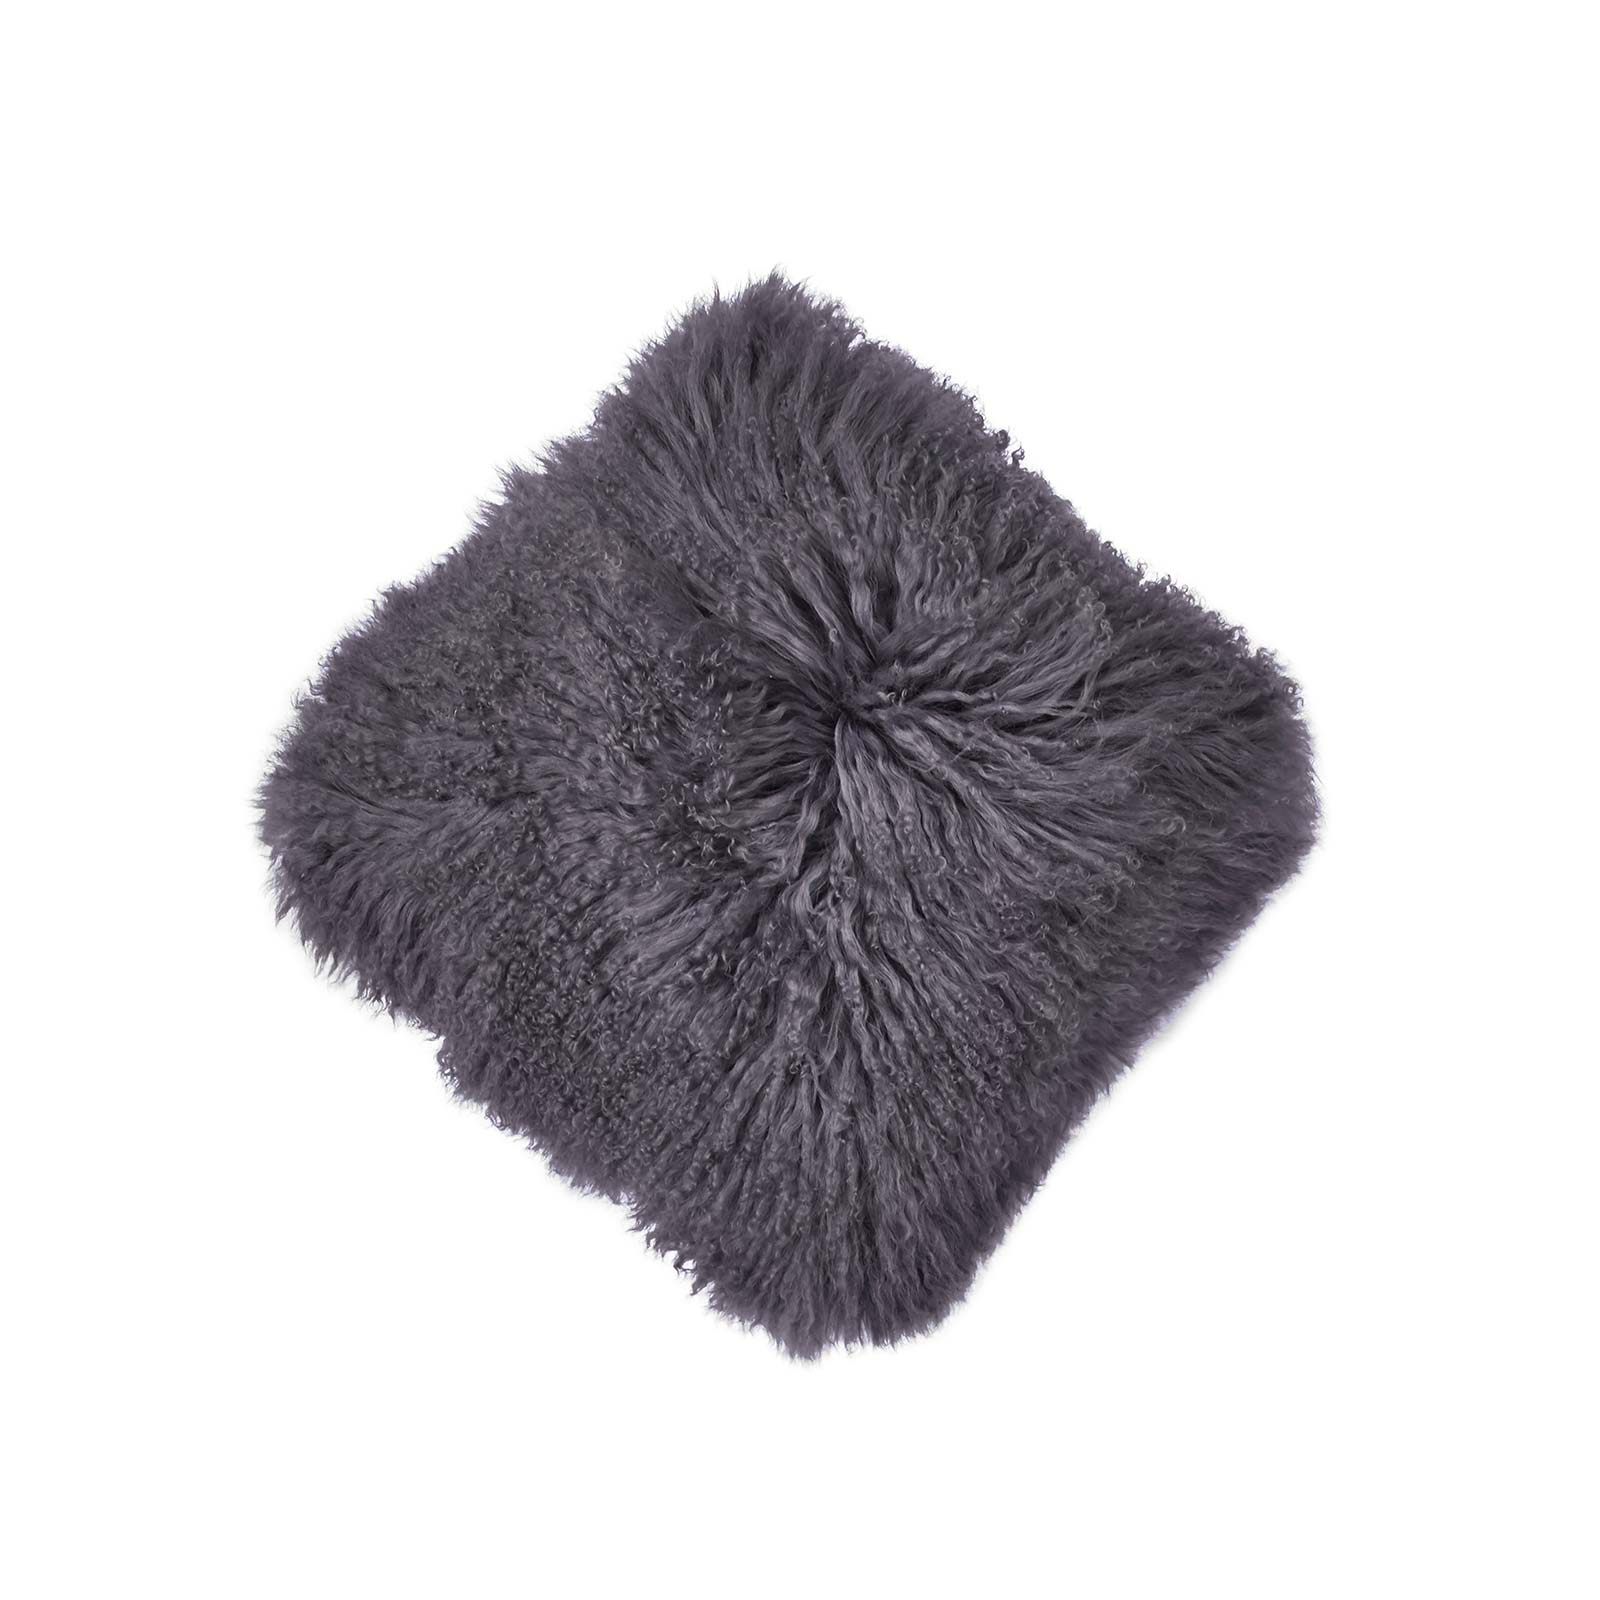 Squared, cm. 40 x 40, soft and warm. Tibet Mongolia leather pillow is perfect to complete your sofa or armchair with a touch of sweetness. Free shipment.